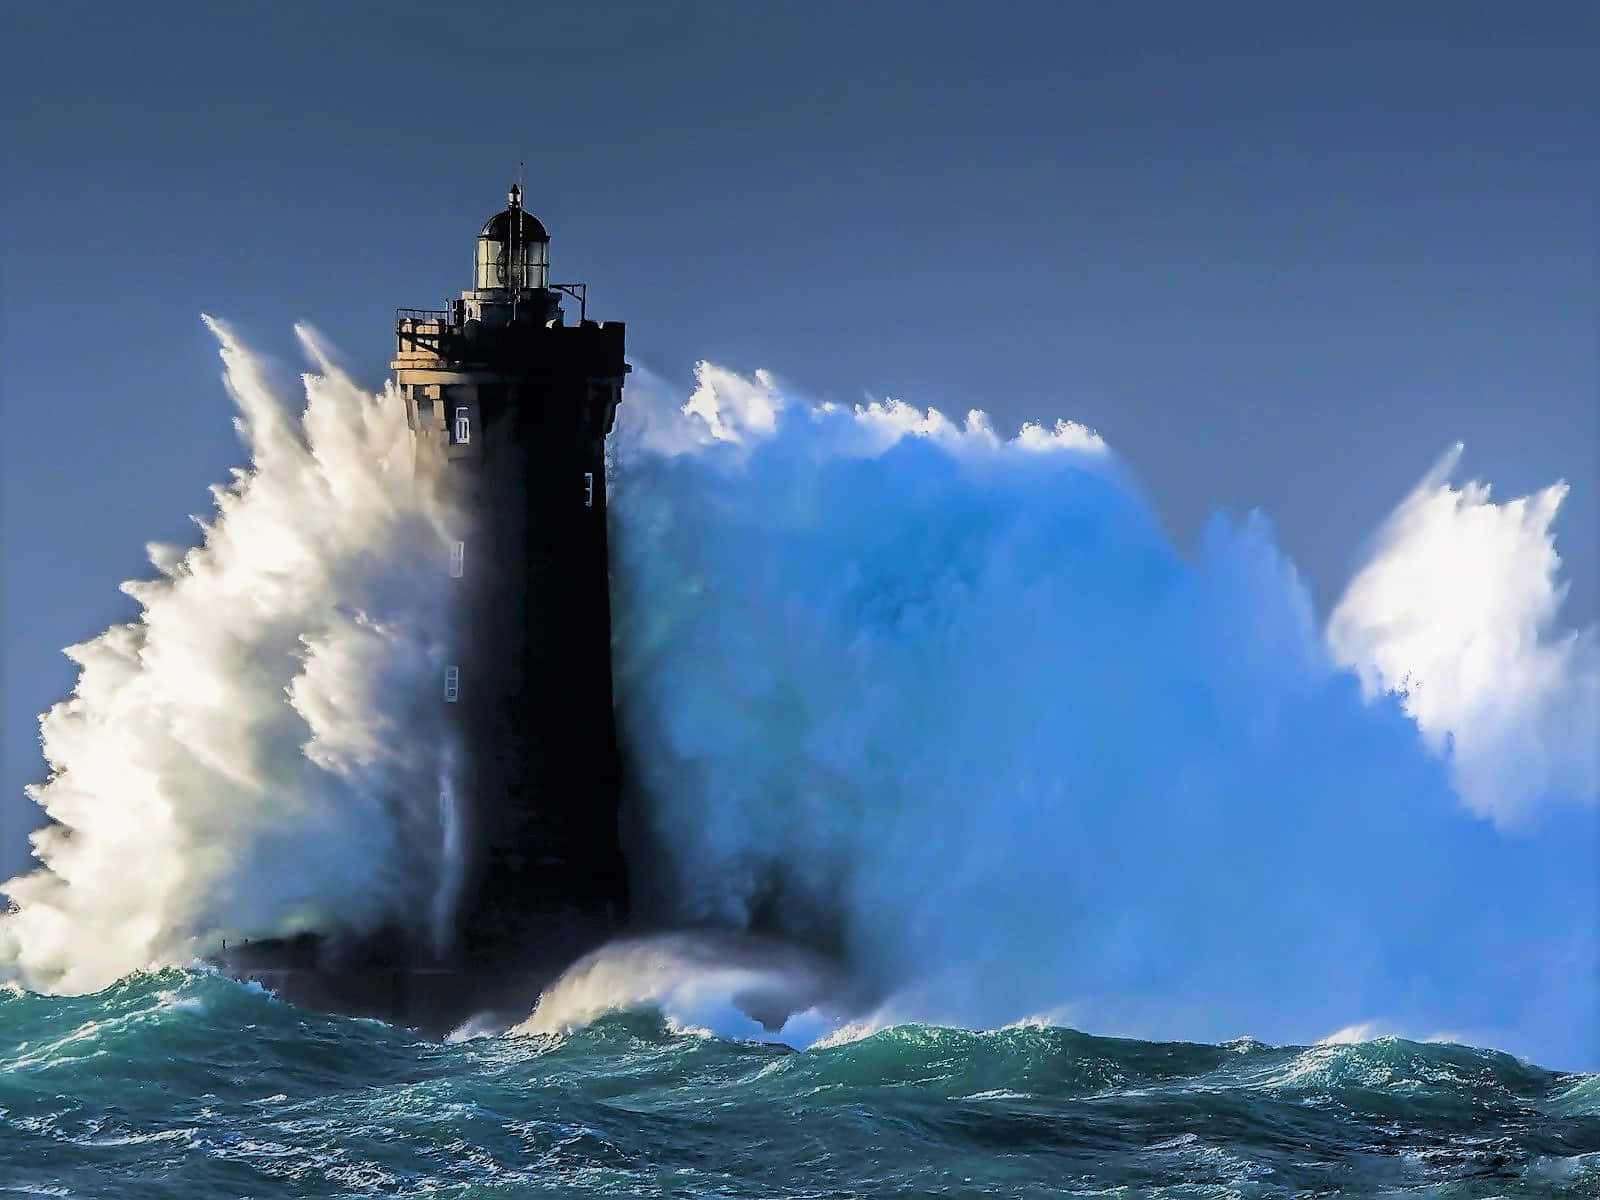 A Lighthouse Is Crashing Into A Large Wave